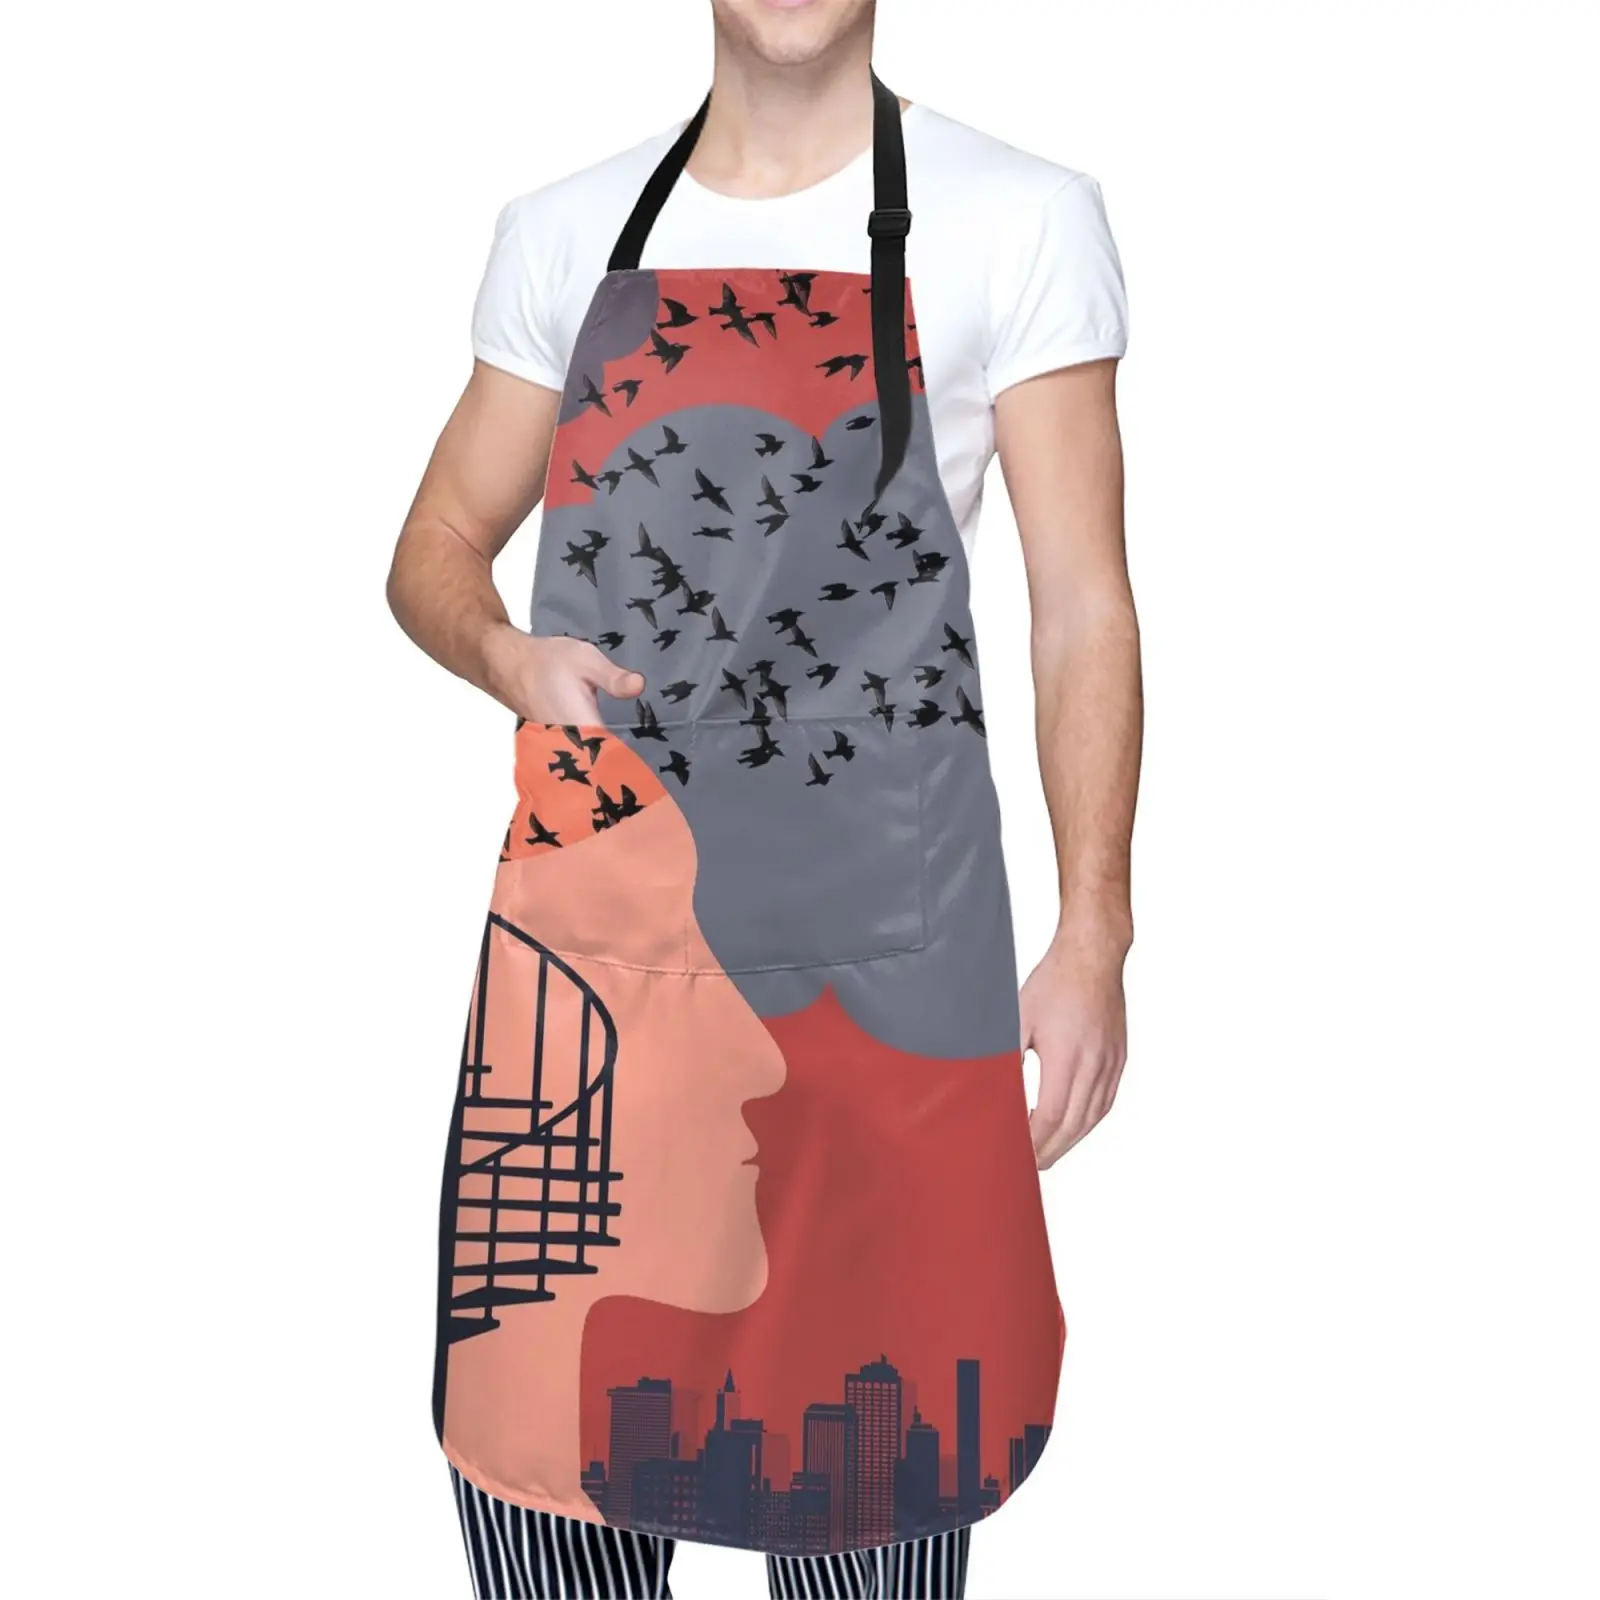 Retro Salon  Apron Red Black Art Unisex Kitchen Bib with Adjustable Neck for Cooking Gardening Nail Waterproof Stain Resistant